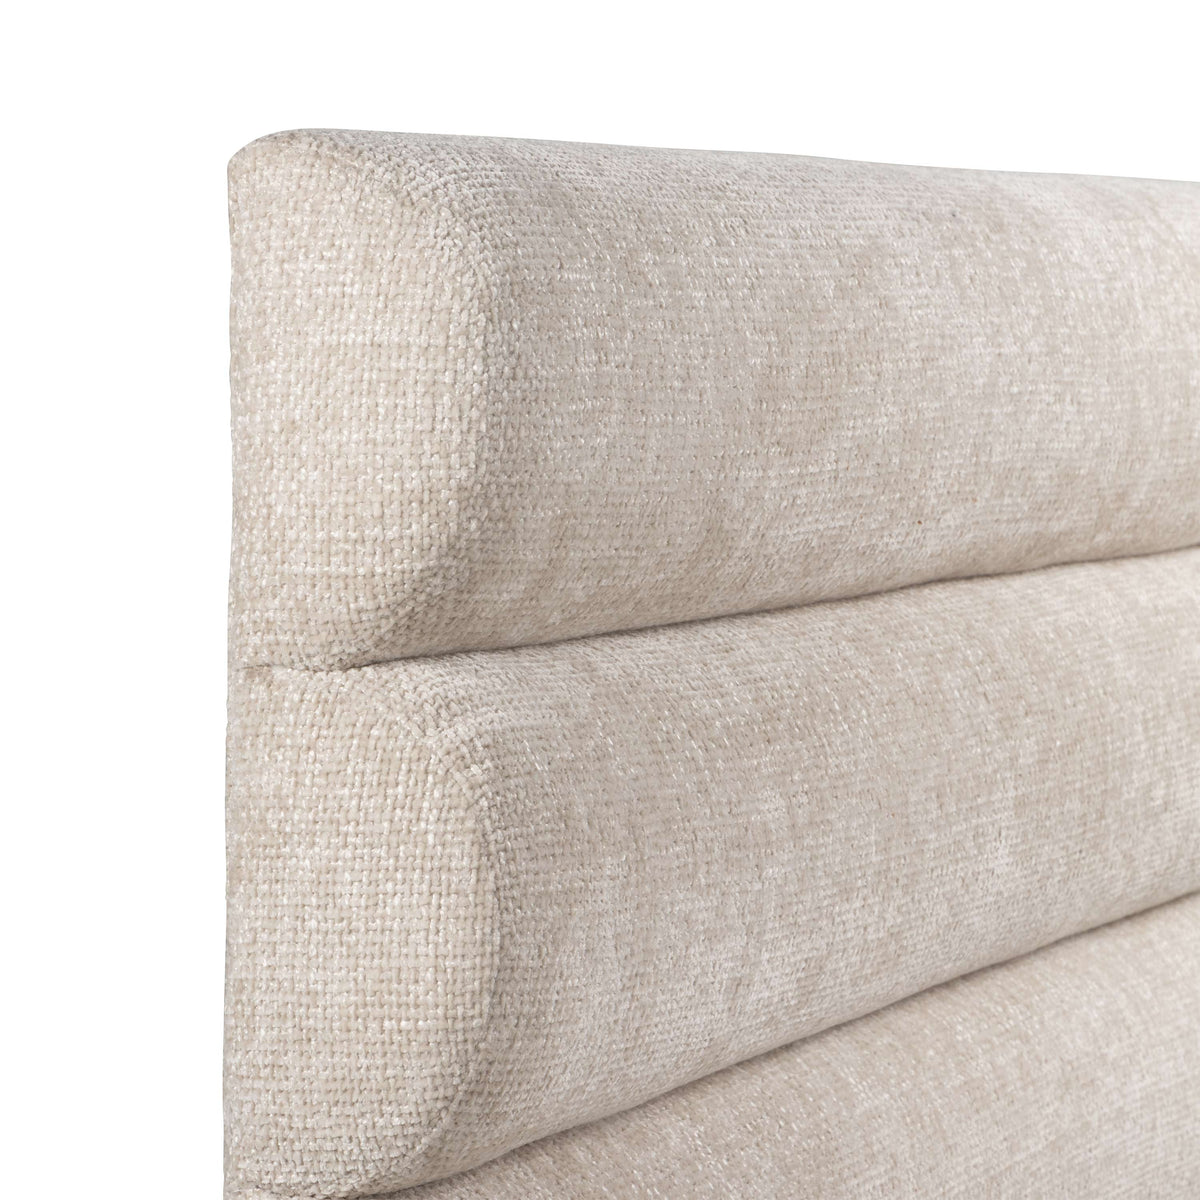 Milan Bed in Knit Fabric